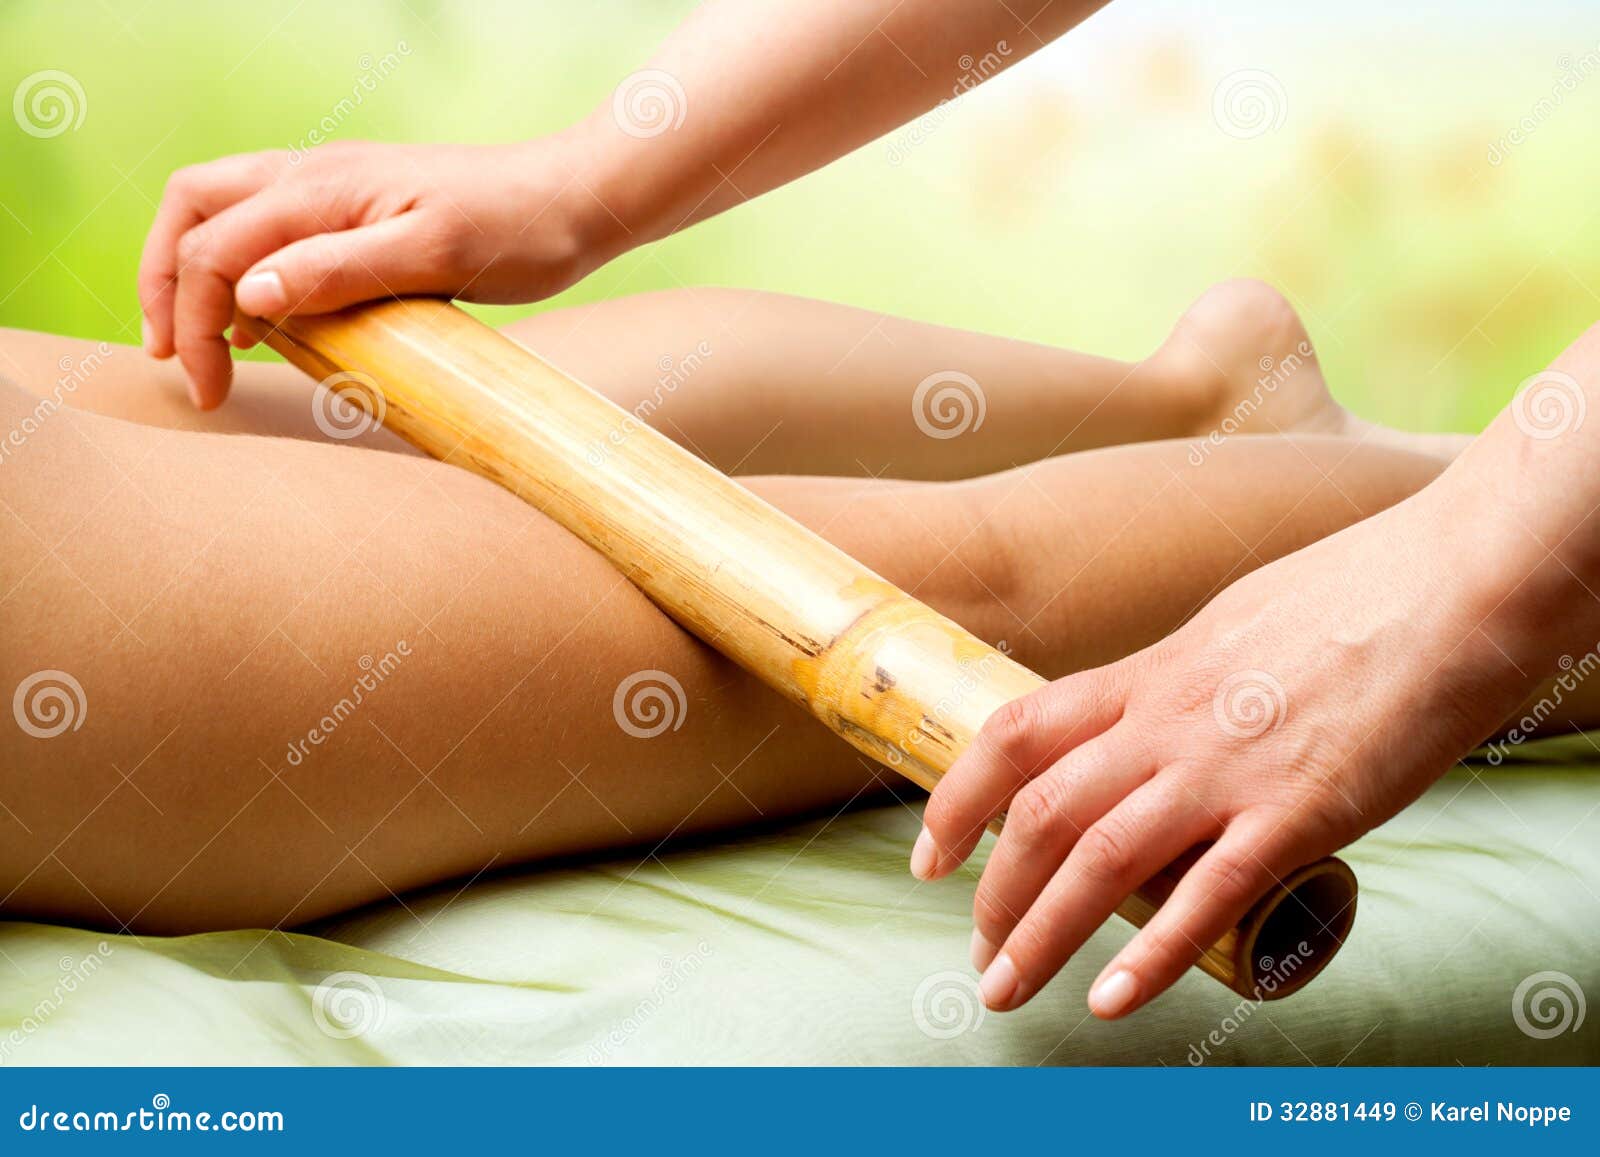 hands massaging female legs with bamboo.